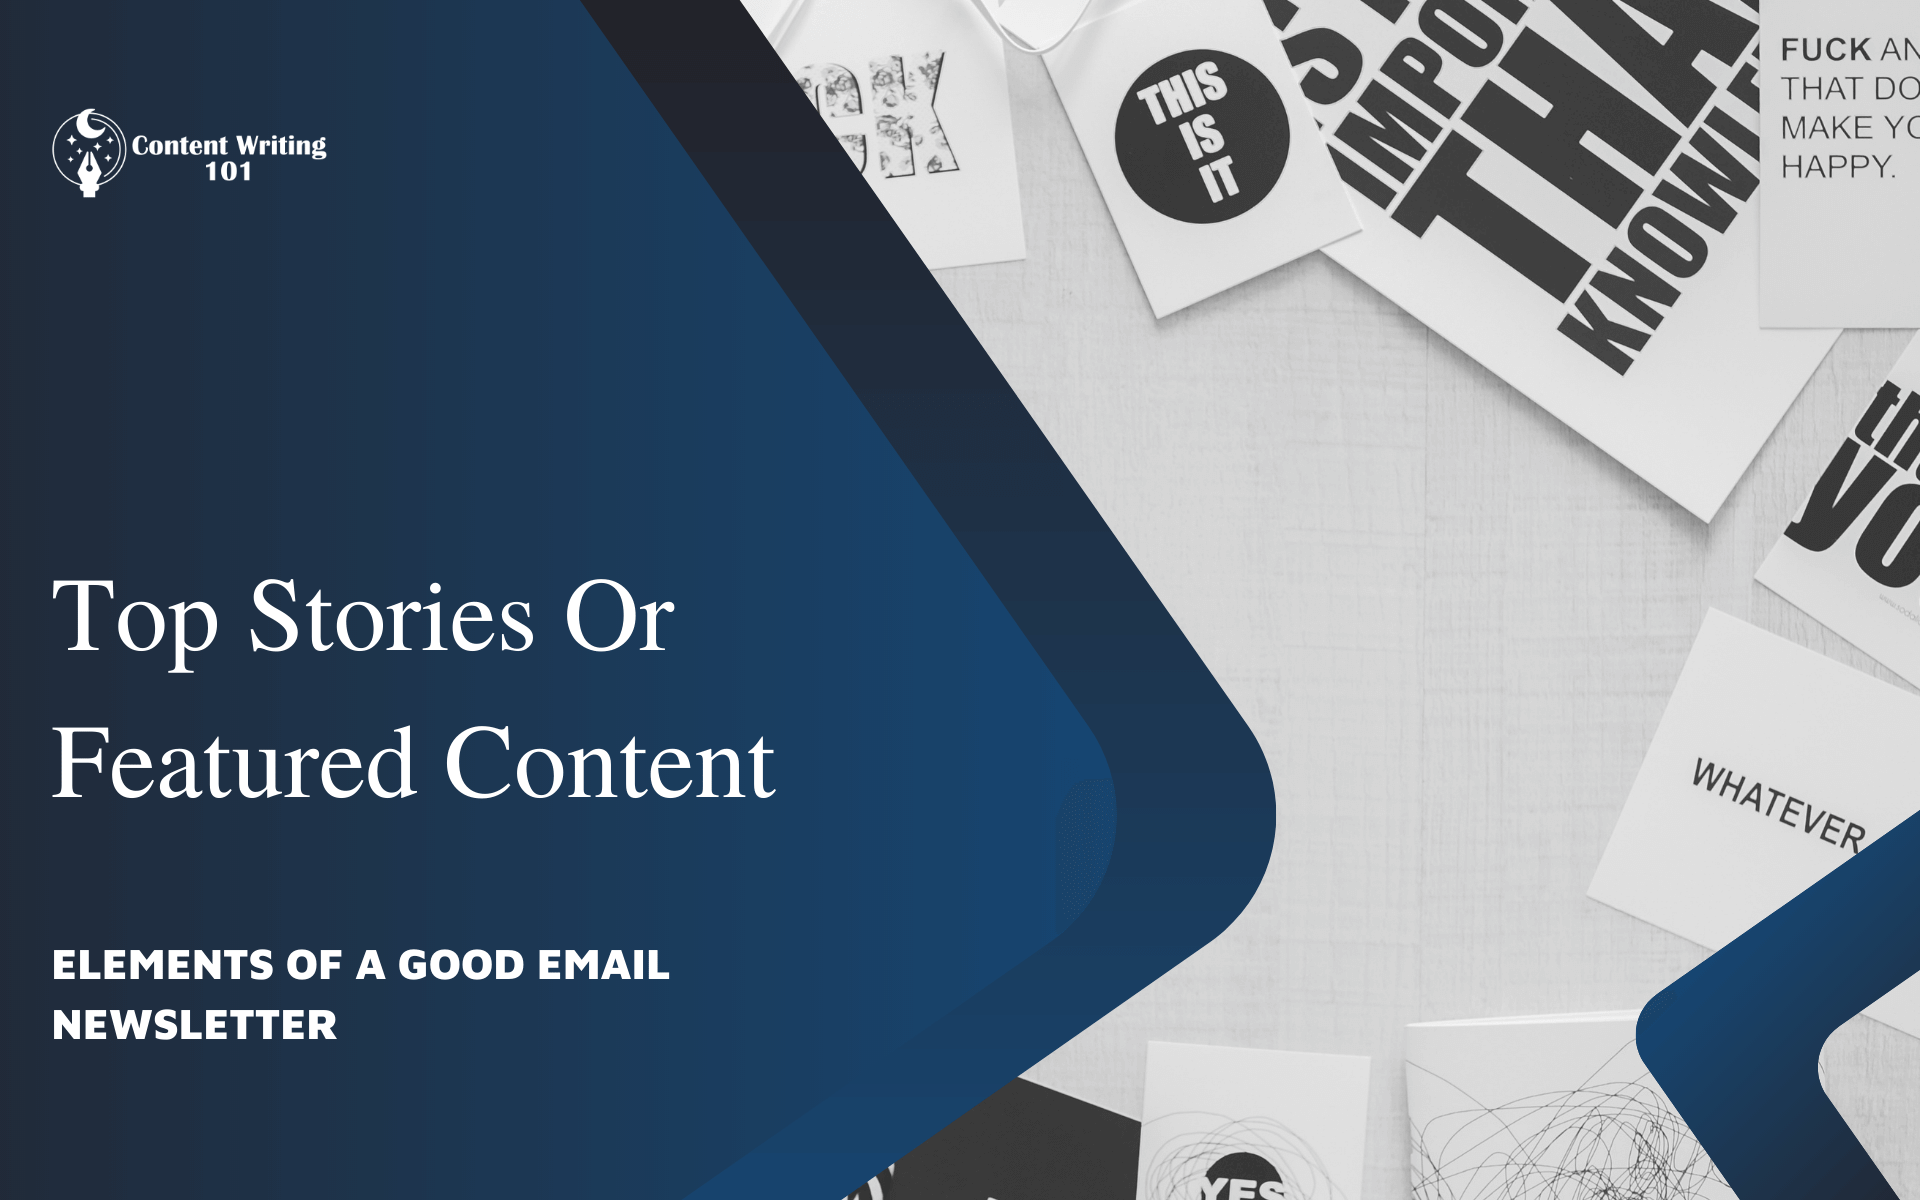 3. Top Stories Or Featured Content